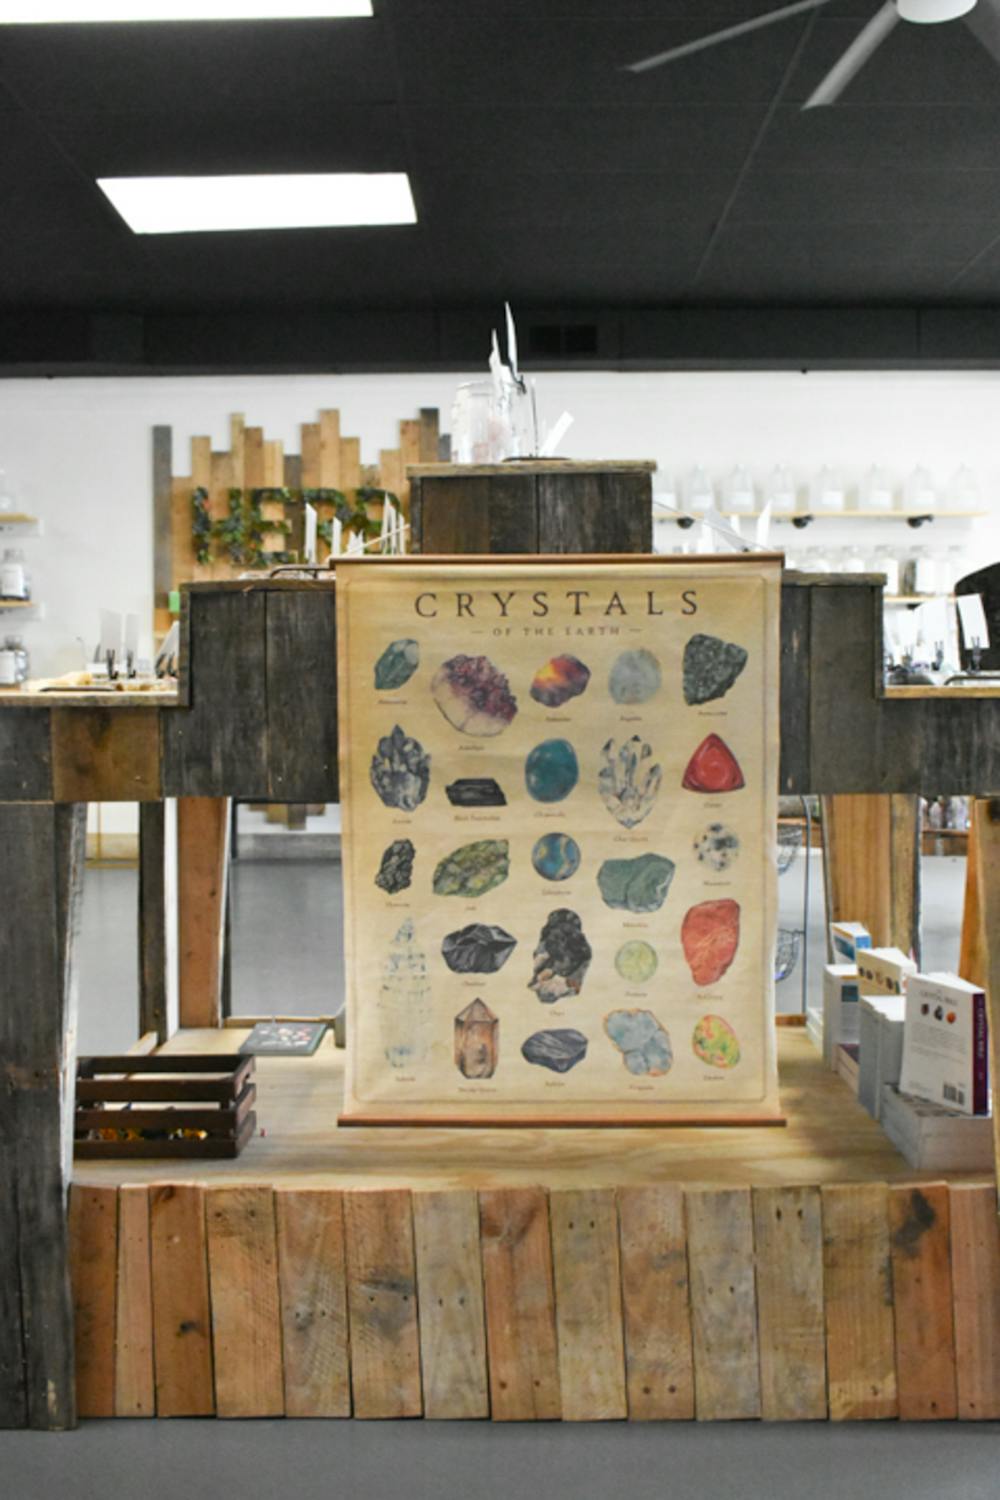 <p>A crystal chart hangs next to The Healing Bar's collection of stones and gems, telling customers the names of the crystals they are browsing. The crystals of the Earth are listed on the chart.</p>